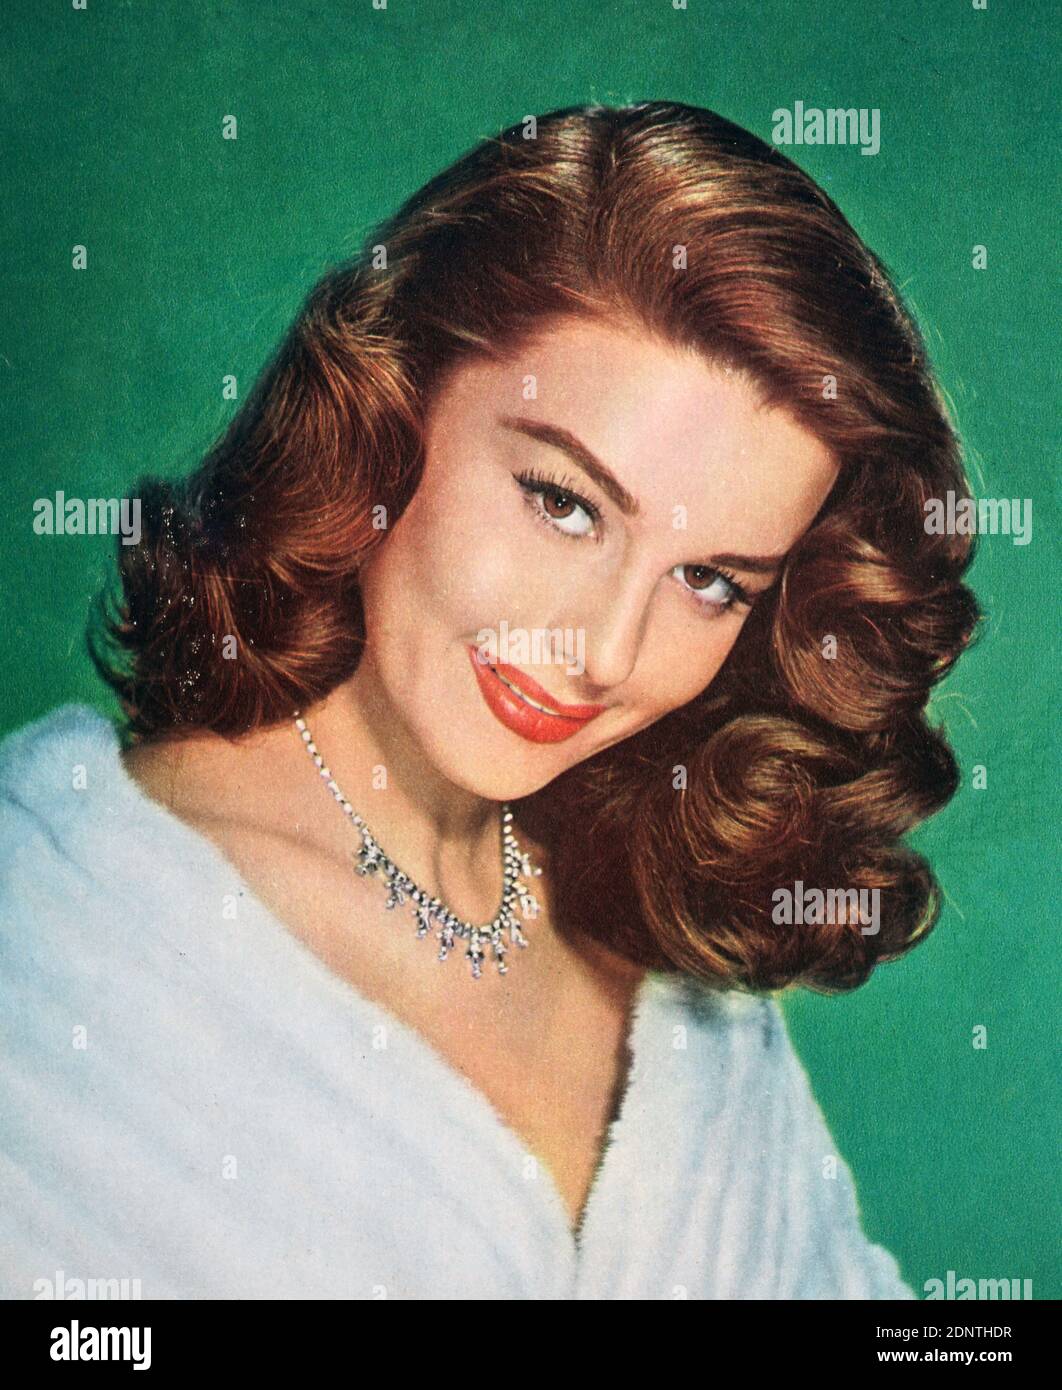 Photograph of Elaine Stewart (1930-2011) an American actress and model. Stock Photo